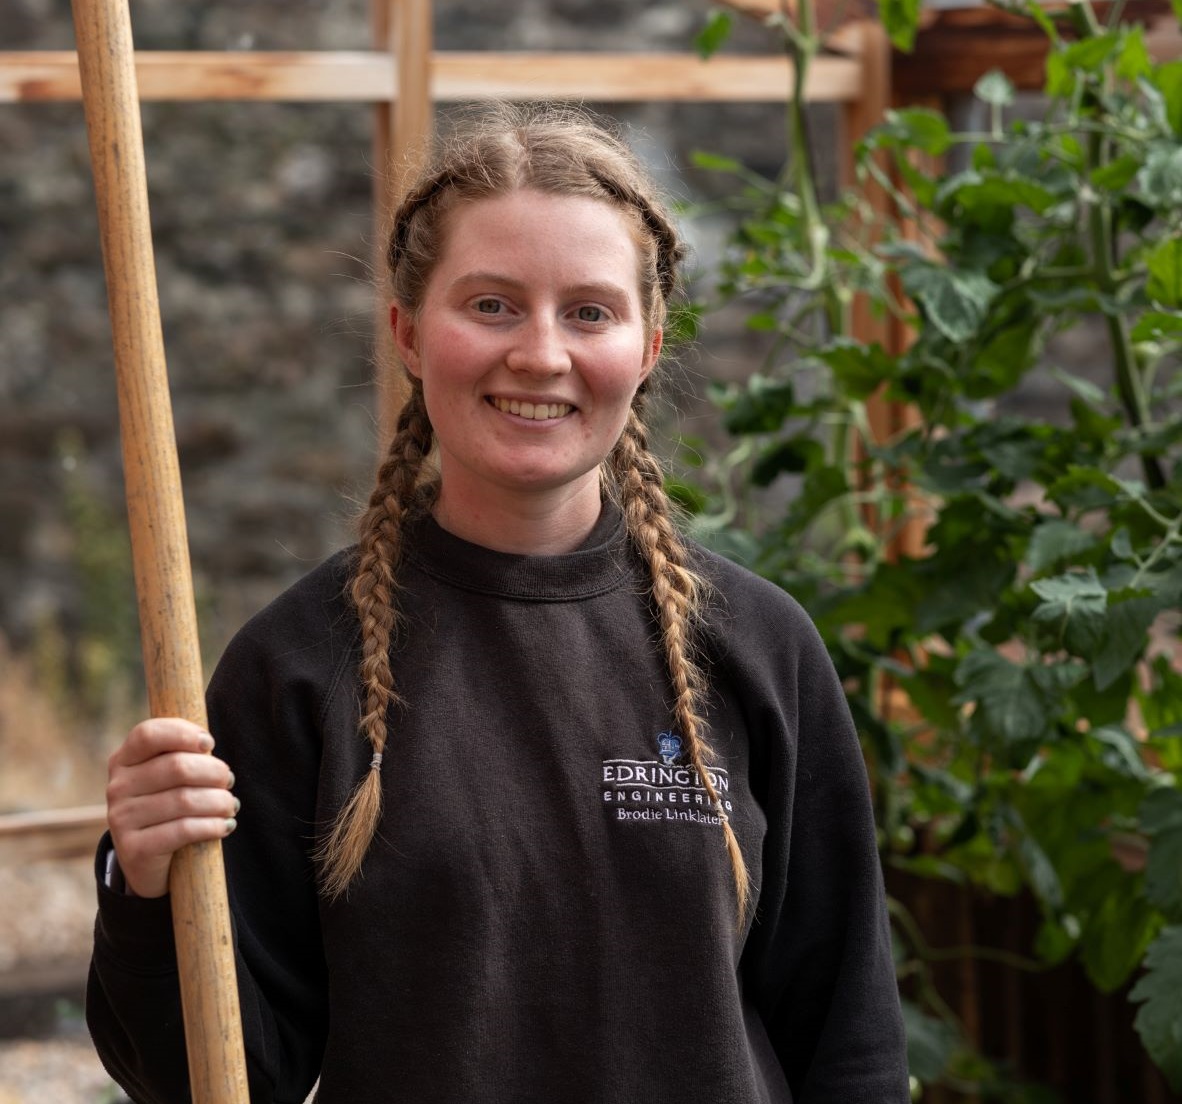 UHI Moray horticulture apprentice wins Horticulture Learner of the Year award